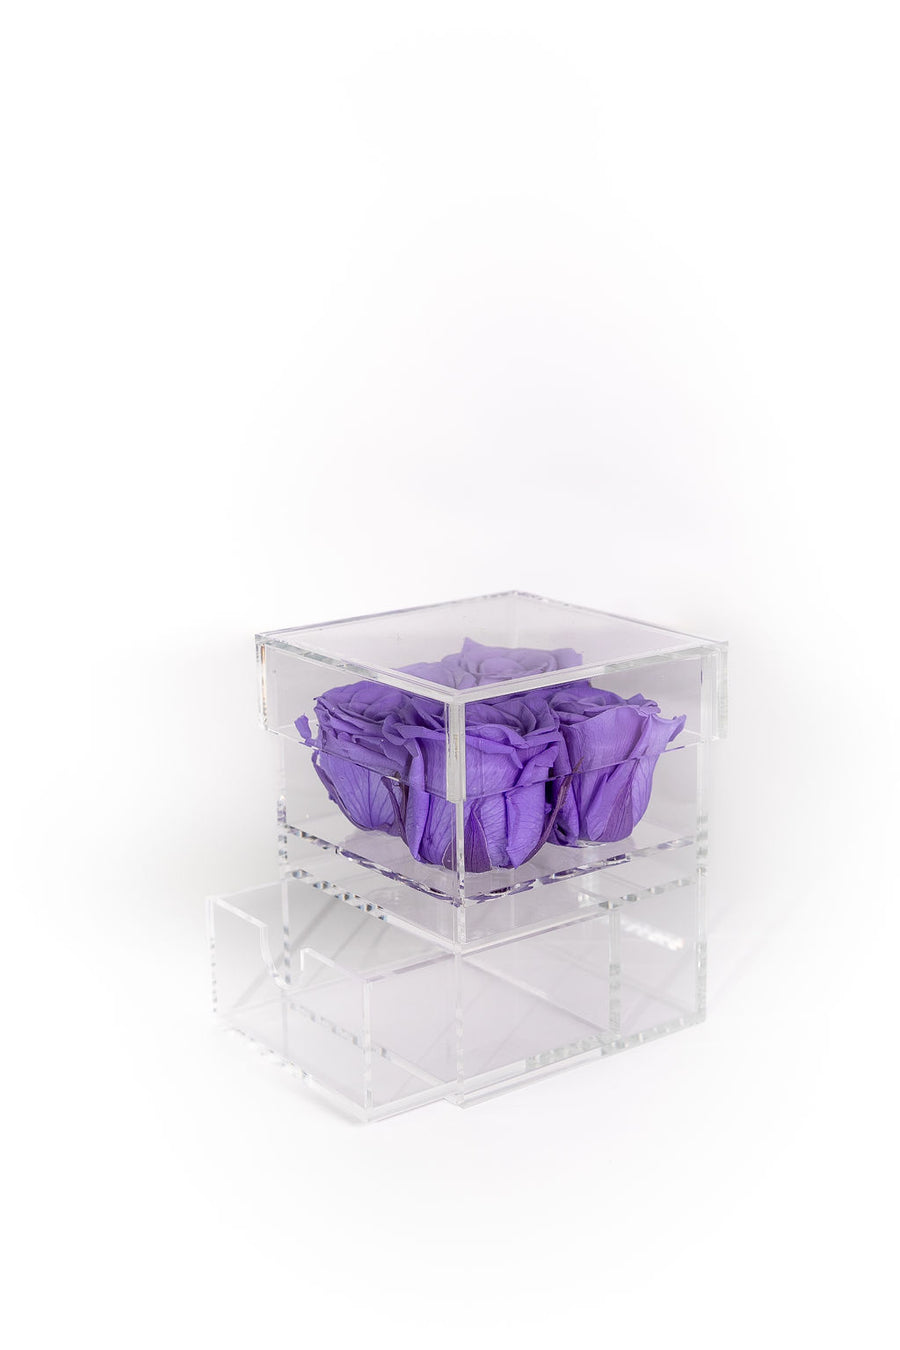 PURPLE FOUR PRESERVED ROSES